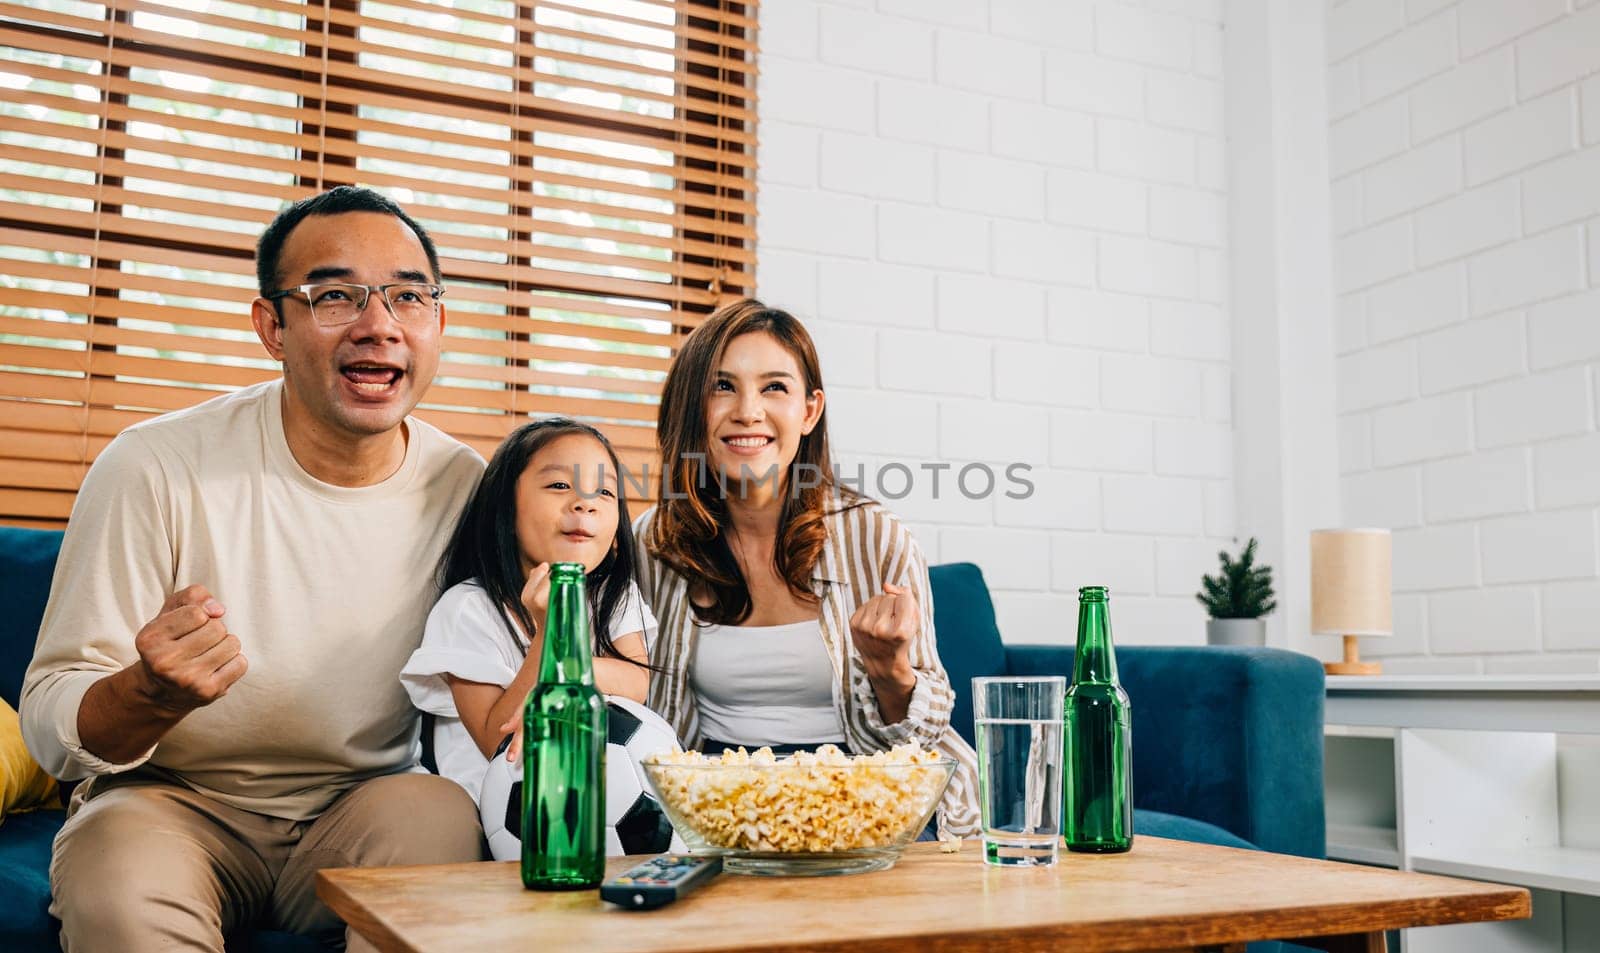 A happy family enjoys the thrill of a football match at home by Sorapop